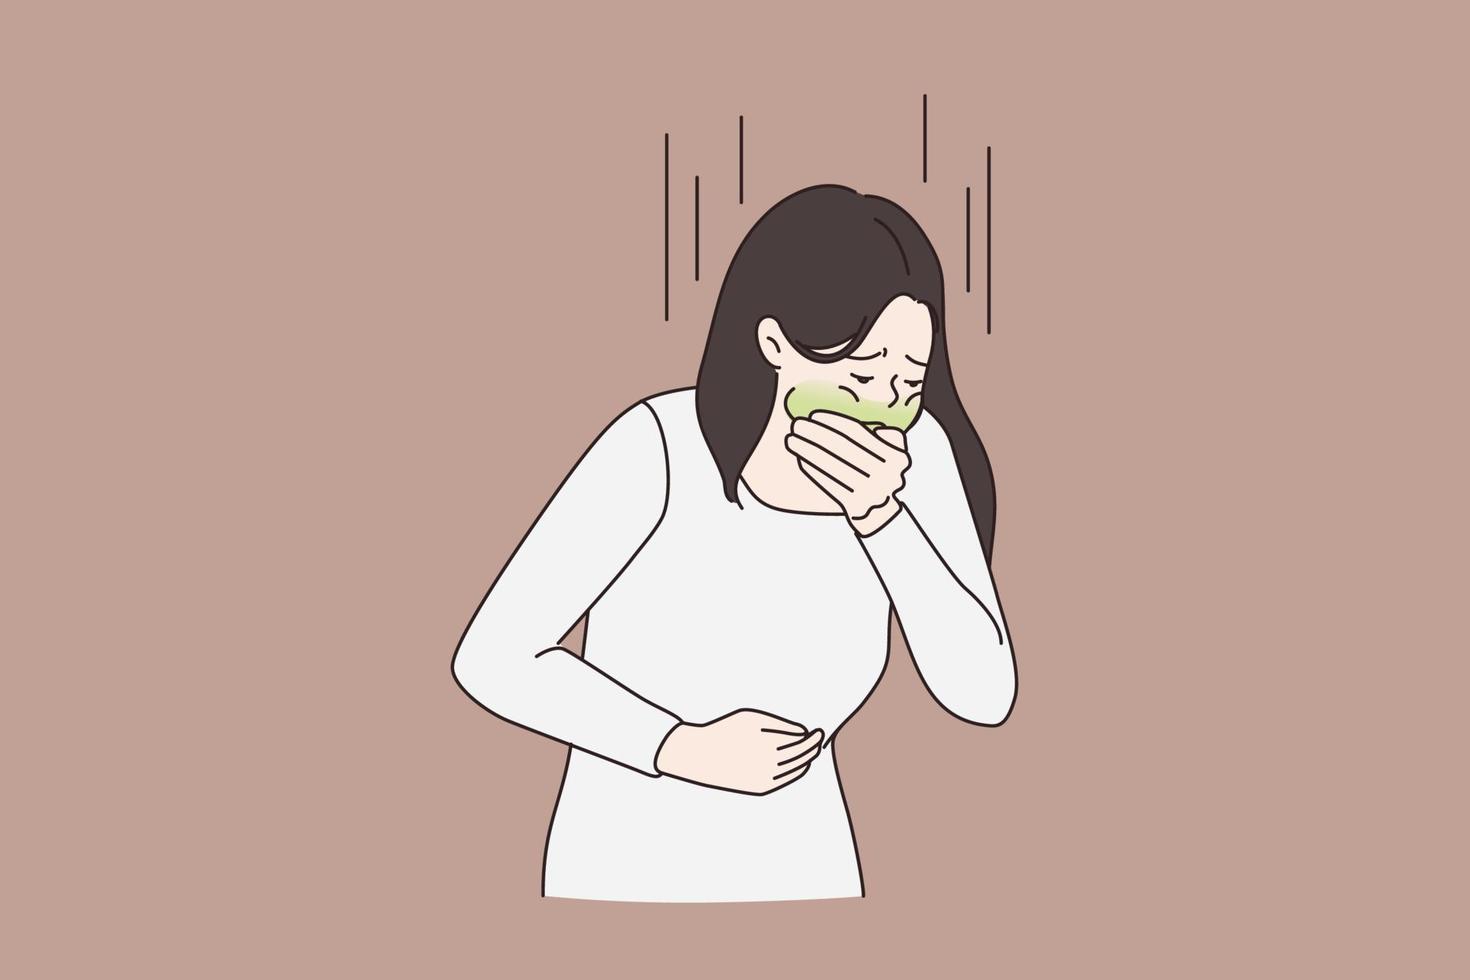 Unwell sick woman feel unhealthy vomit throw up. Ill girl cover mouth suffer from food poisoning. Pregnancy symptom or nausea concept. Health problem. Vector illustration, cartoon character.